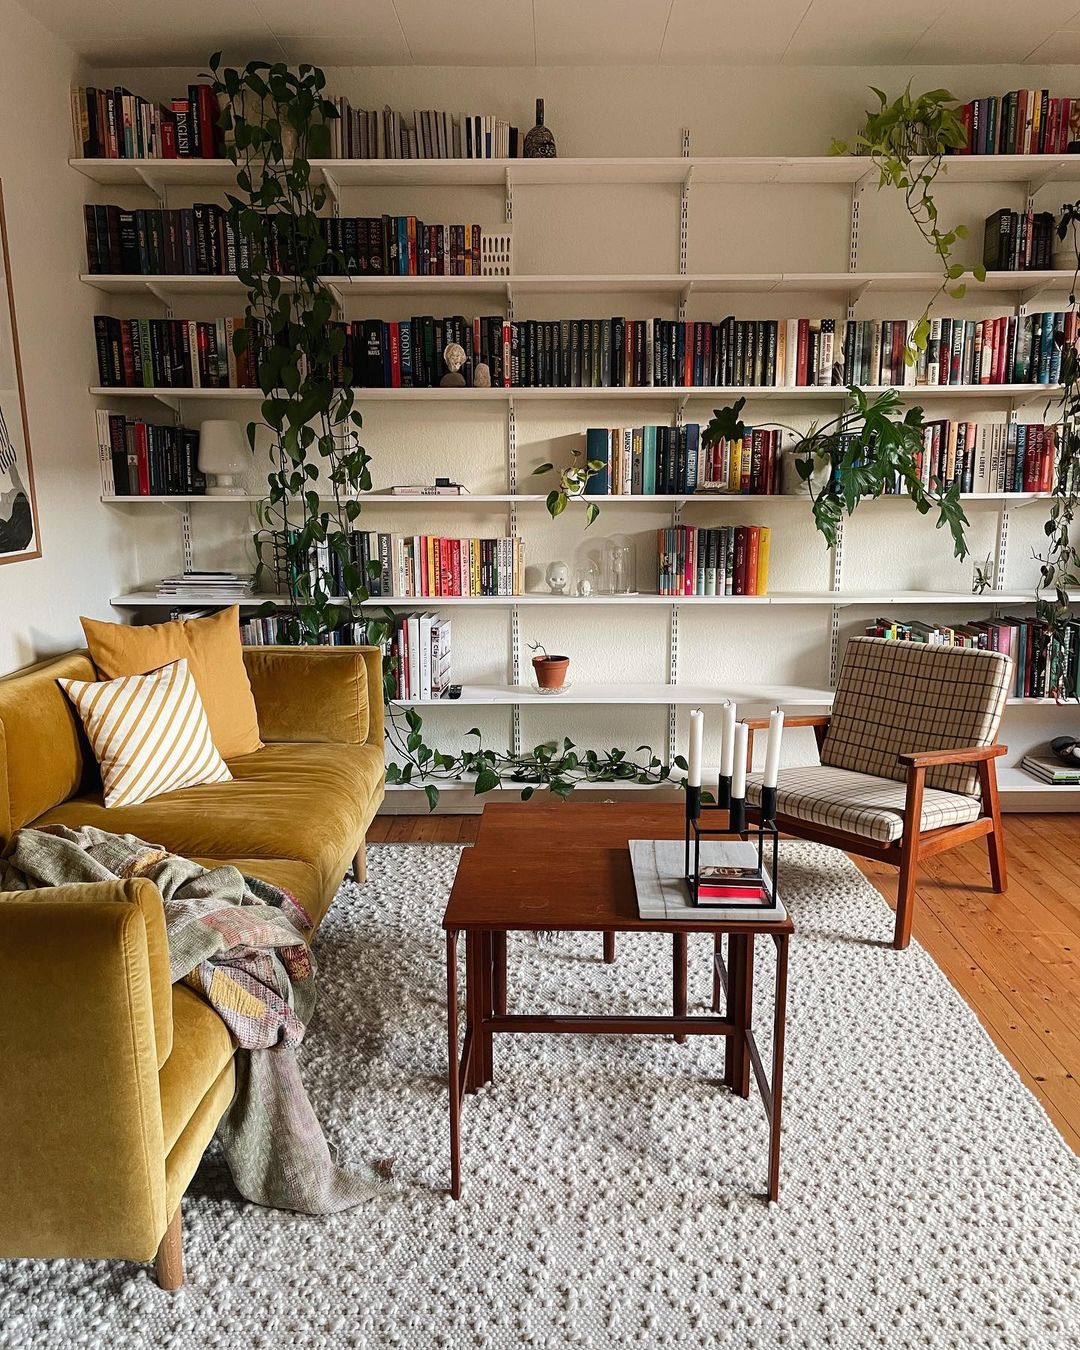 Modern Living Room with Large Library Wall. Photo by Instagram user @thildesecher